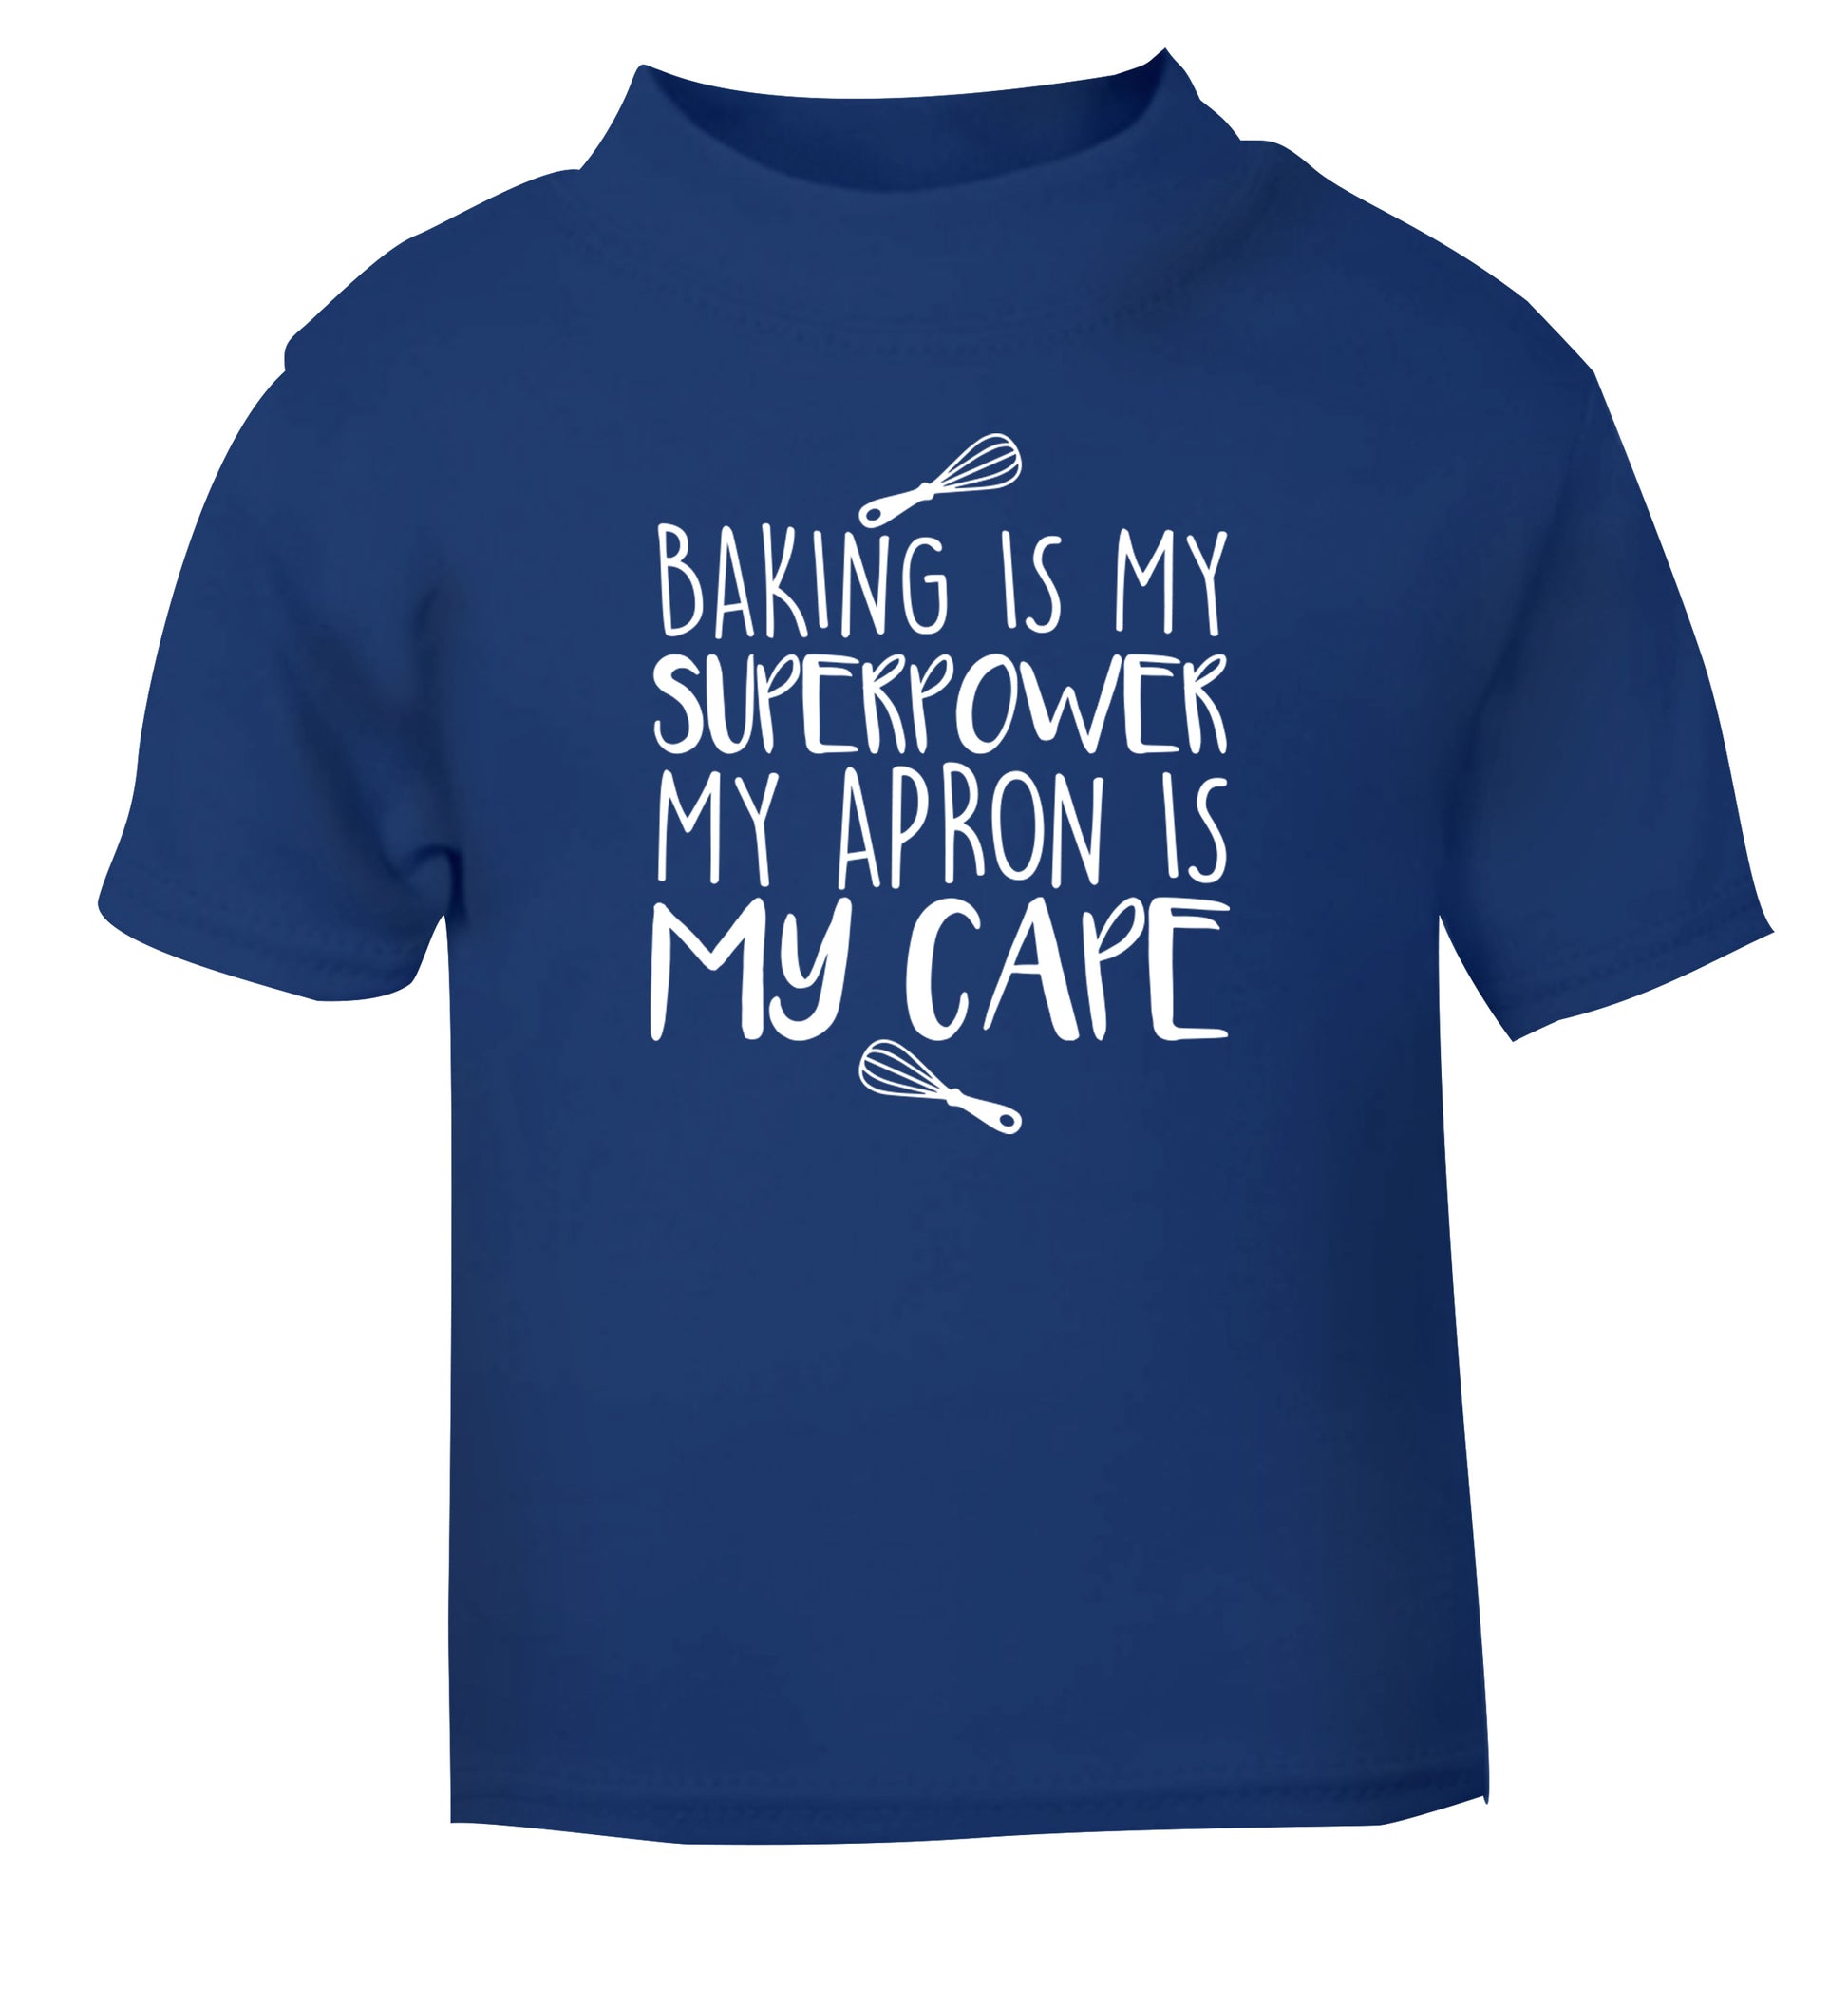 Baking is my superpower my apron is my cape blue Baby Toddler Tshirt 2 Years